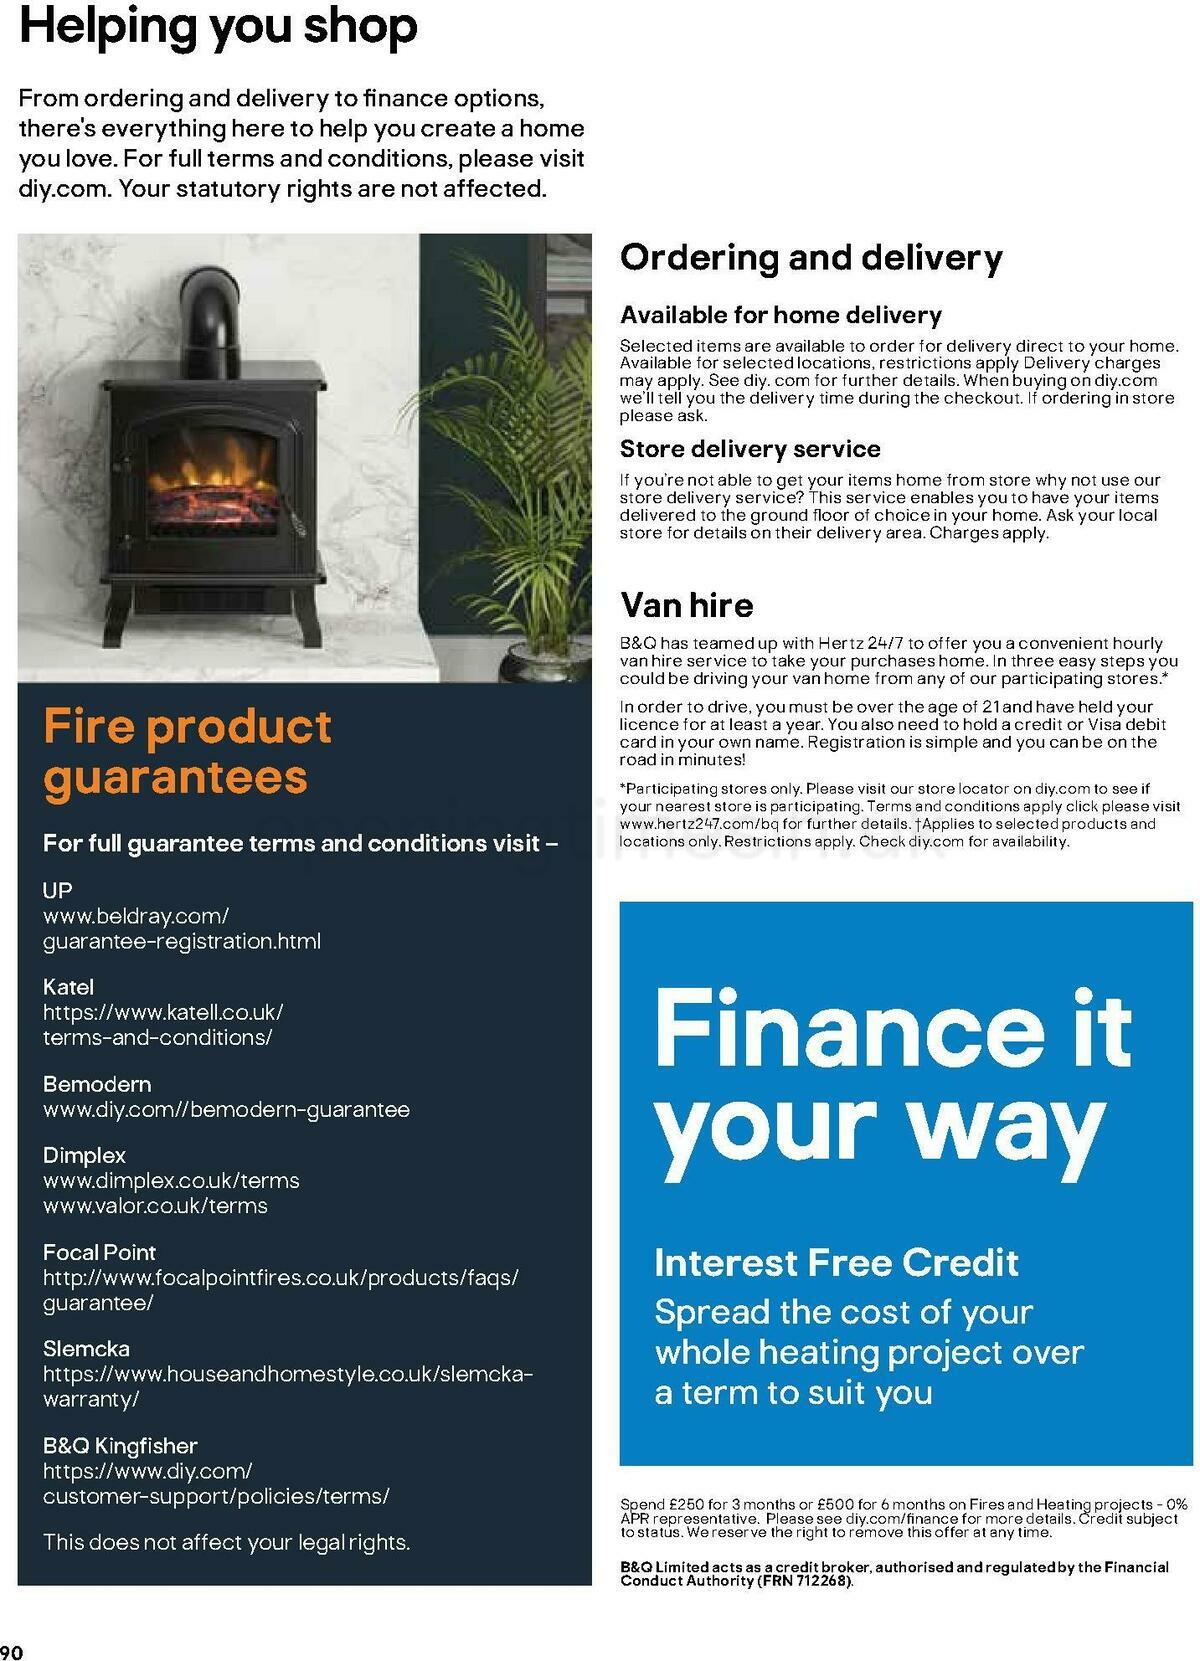 B&Q Fire Collections Offers from 1 October